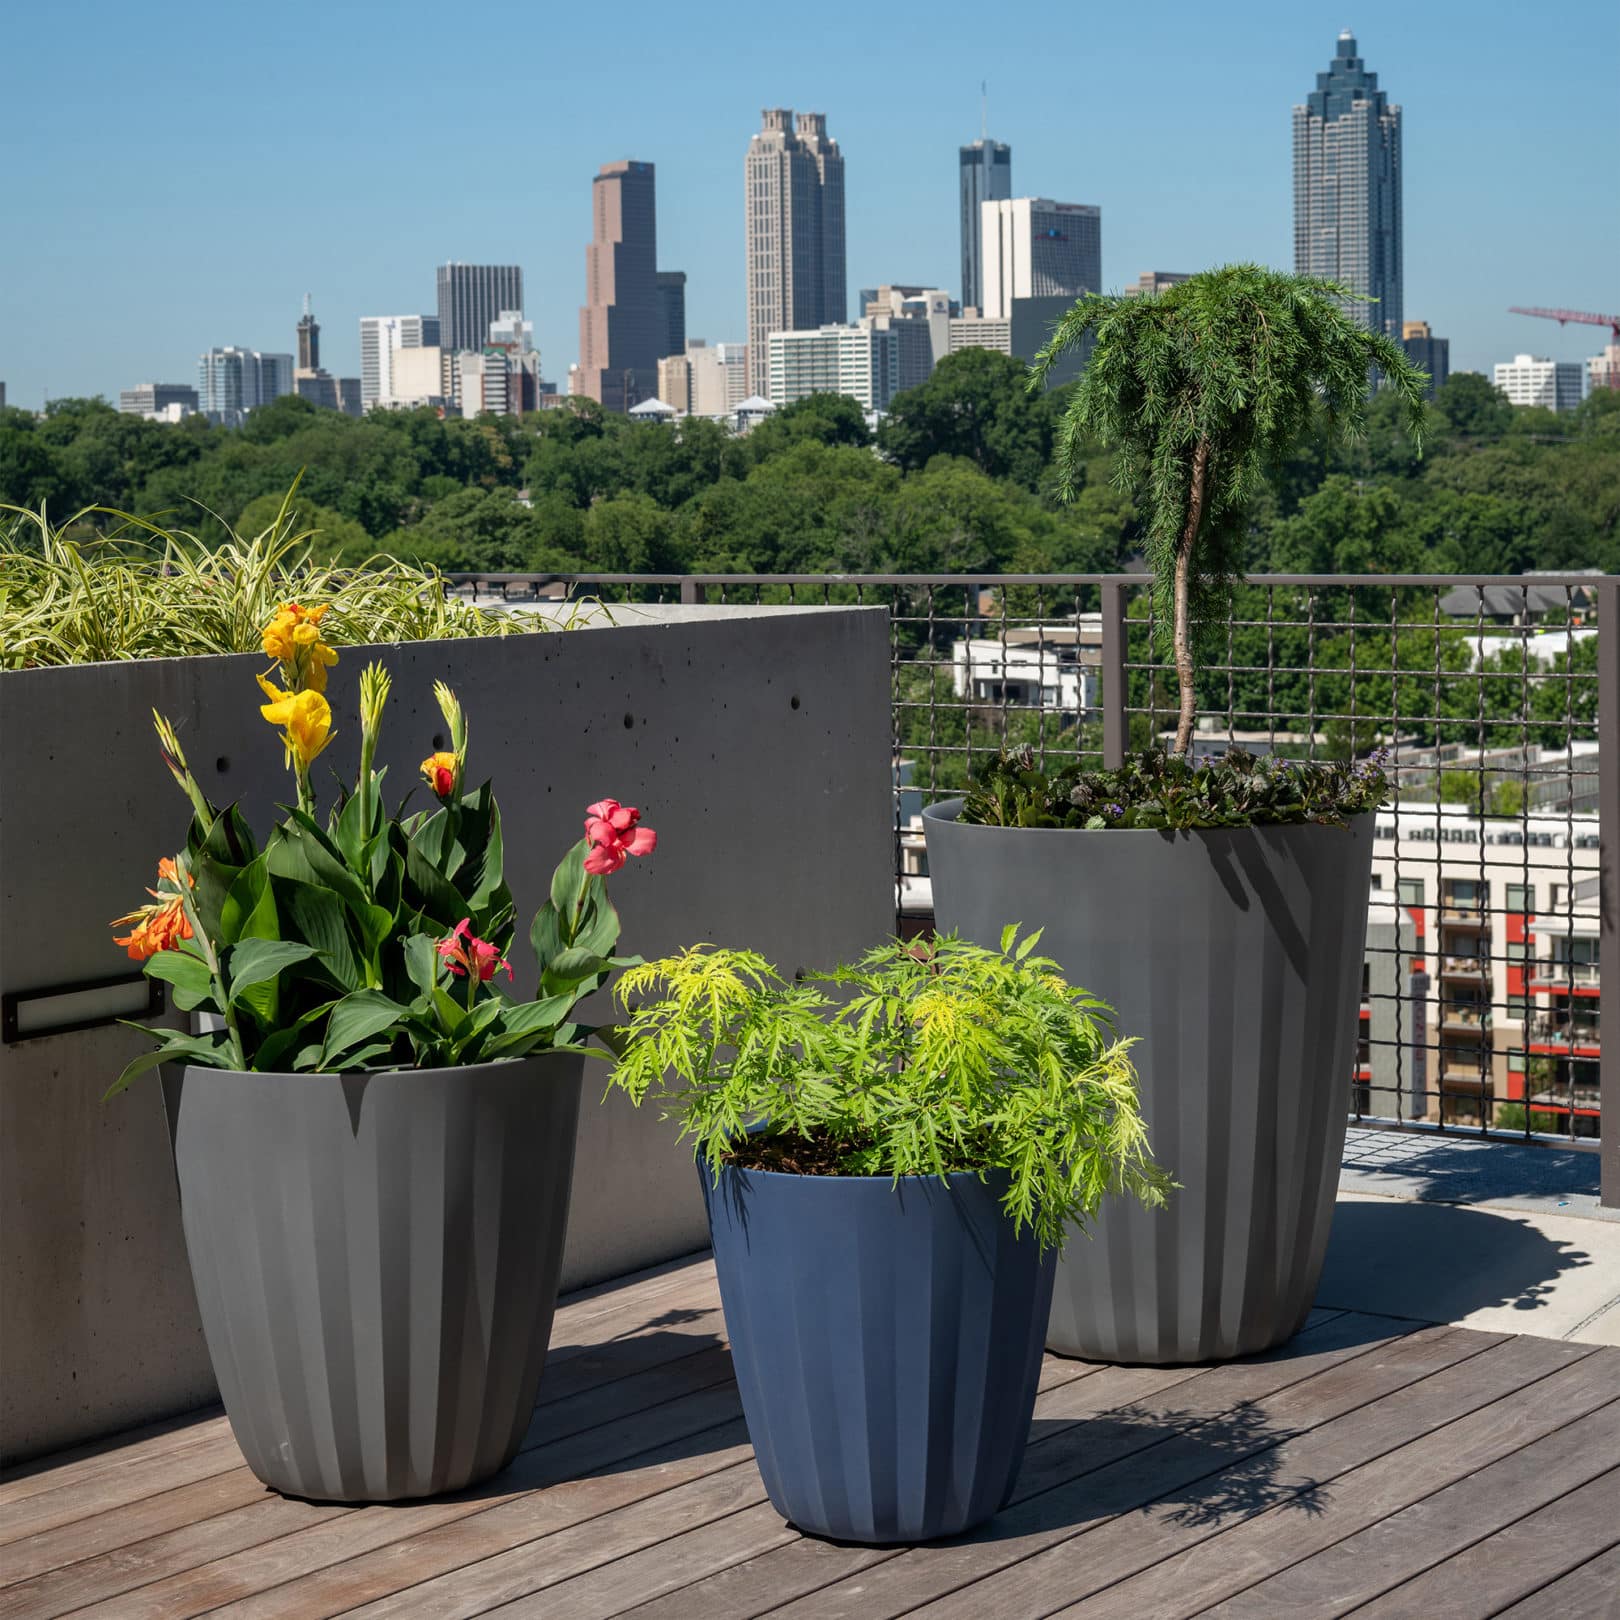 City Rooftop with Pleat Planters